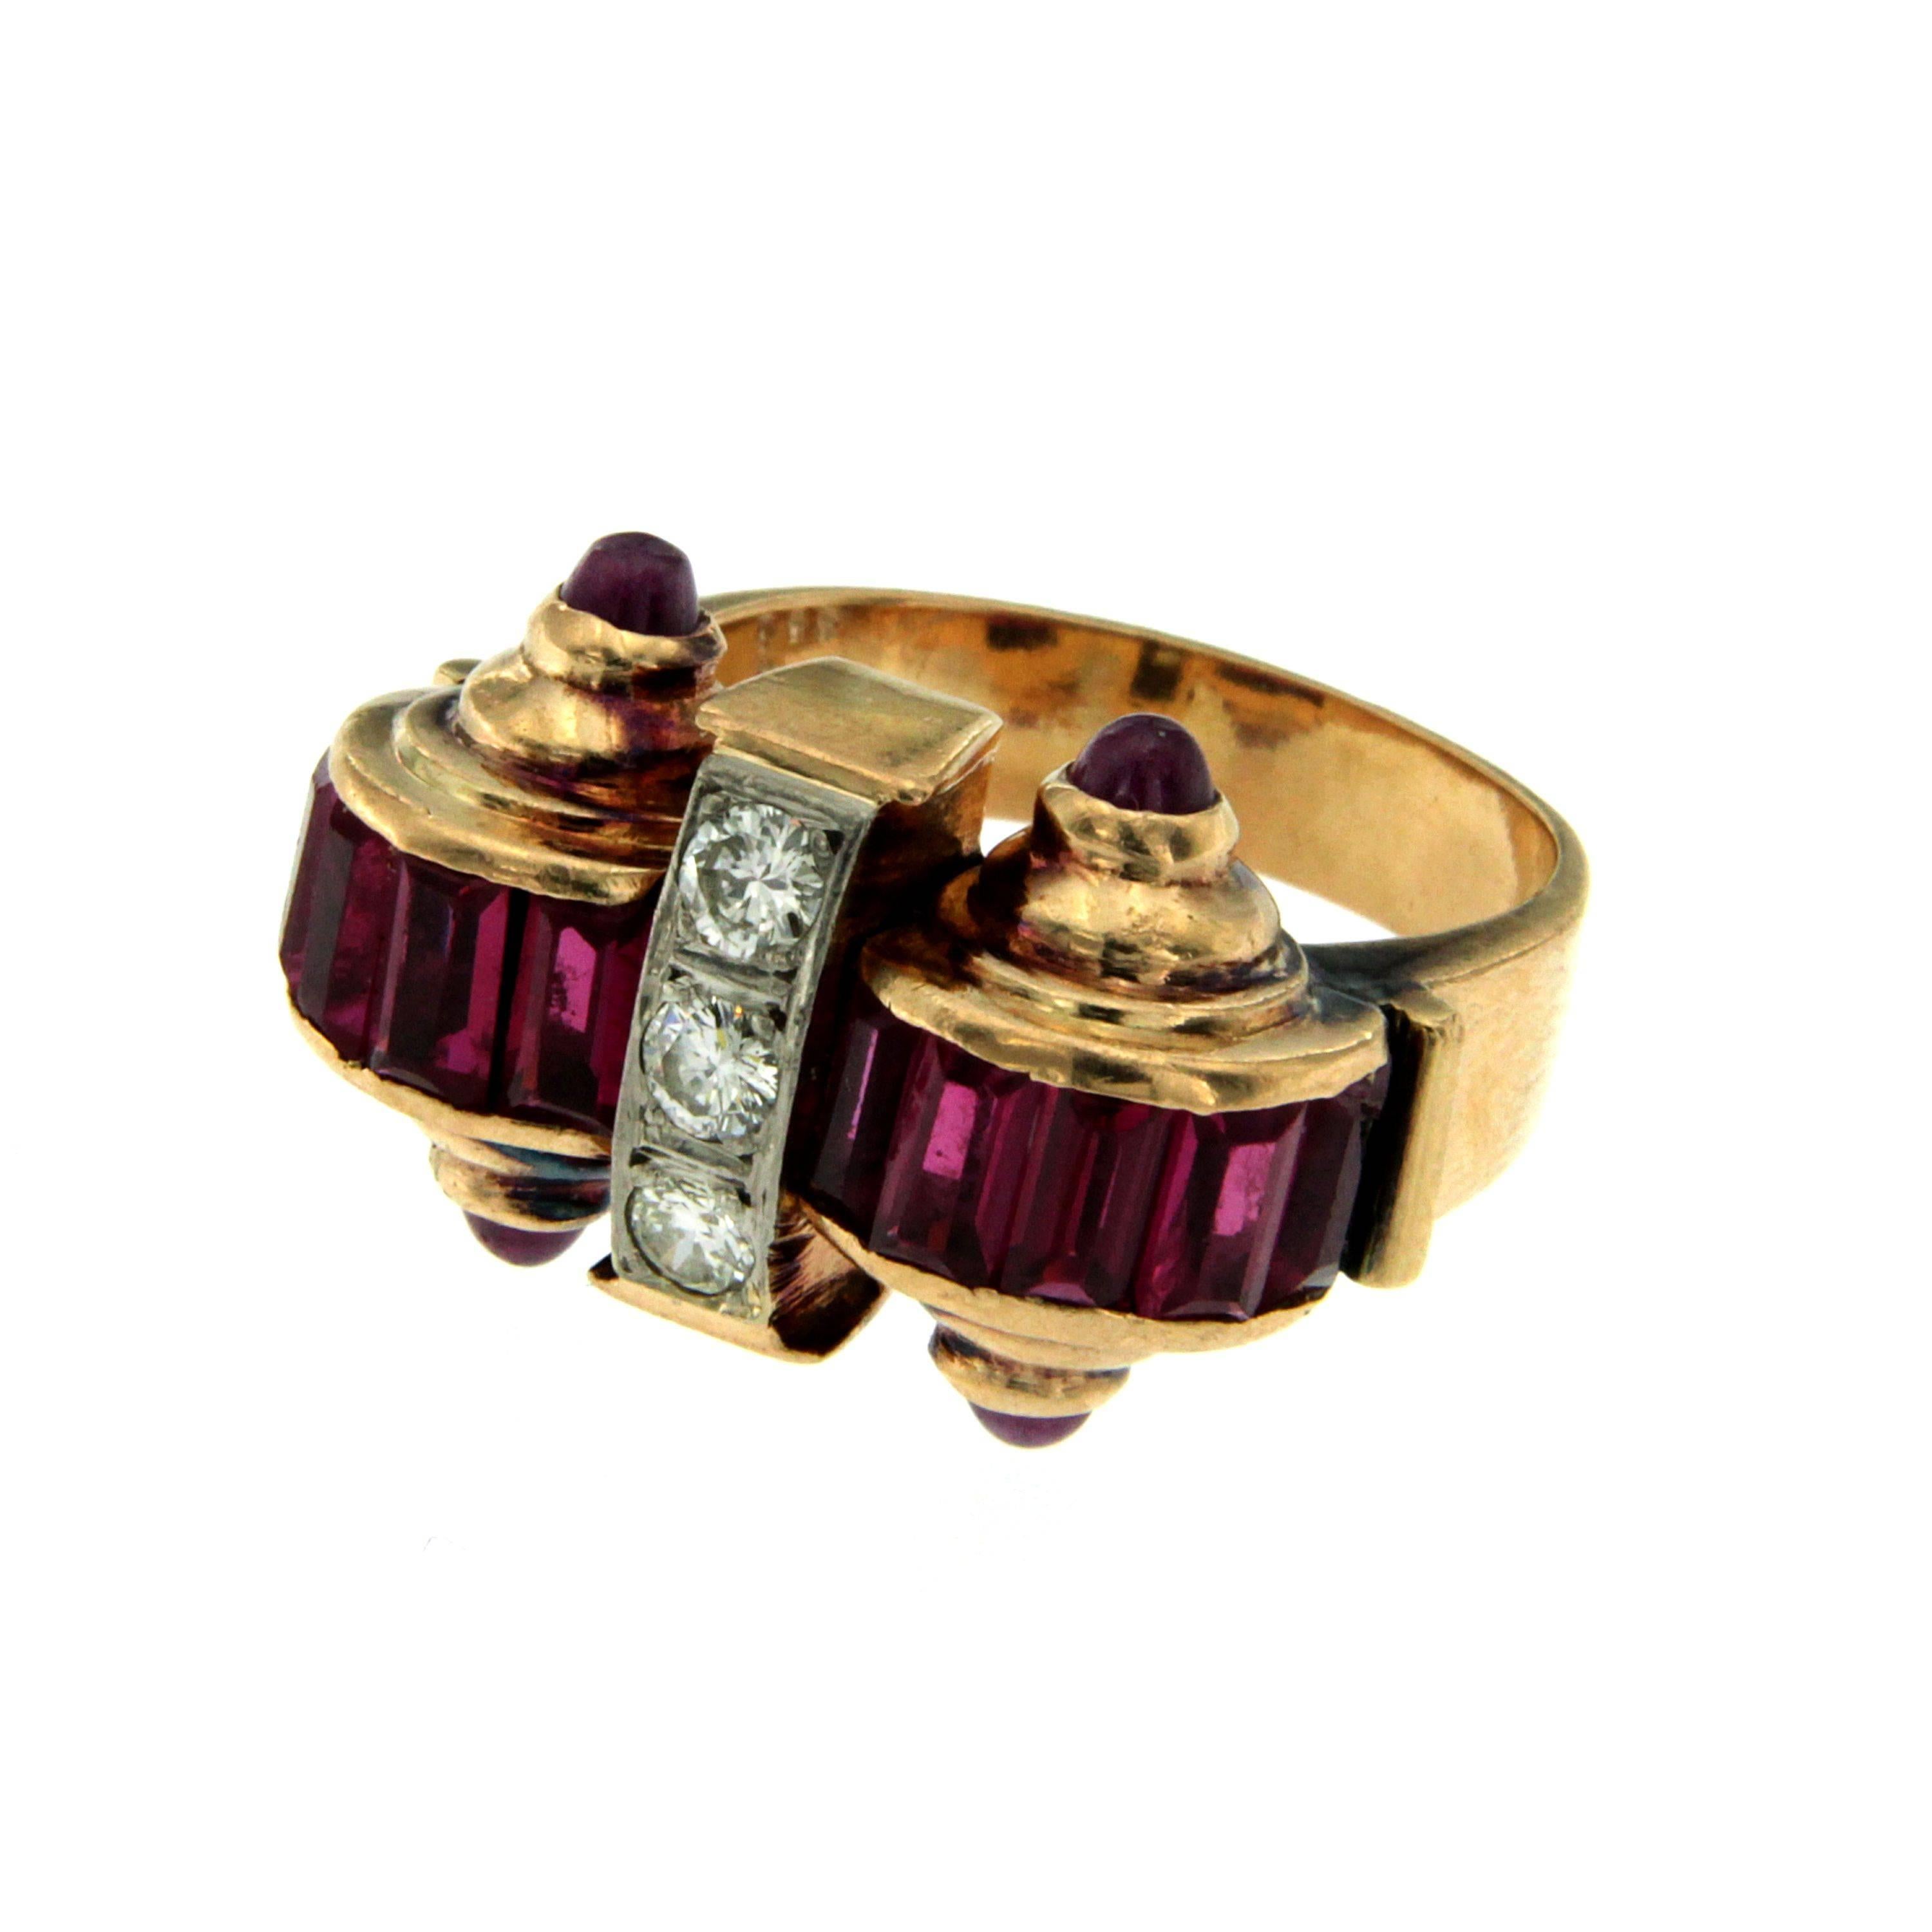 Beautiful Retro Ring handcrafted in 18k Rose Gold. The center is set with 3 round brilliant cut diamonds .60cts Color H, Clarity VS, accented by 10 baguette cut Rubies and 4 cabochon Rubies approx. 2.00 total carats. Circa 1950

CONDITION: Pre-owned